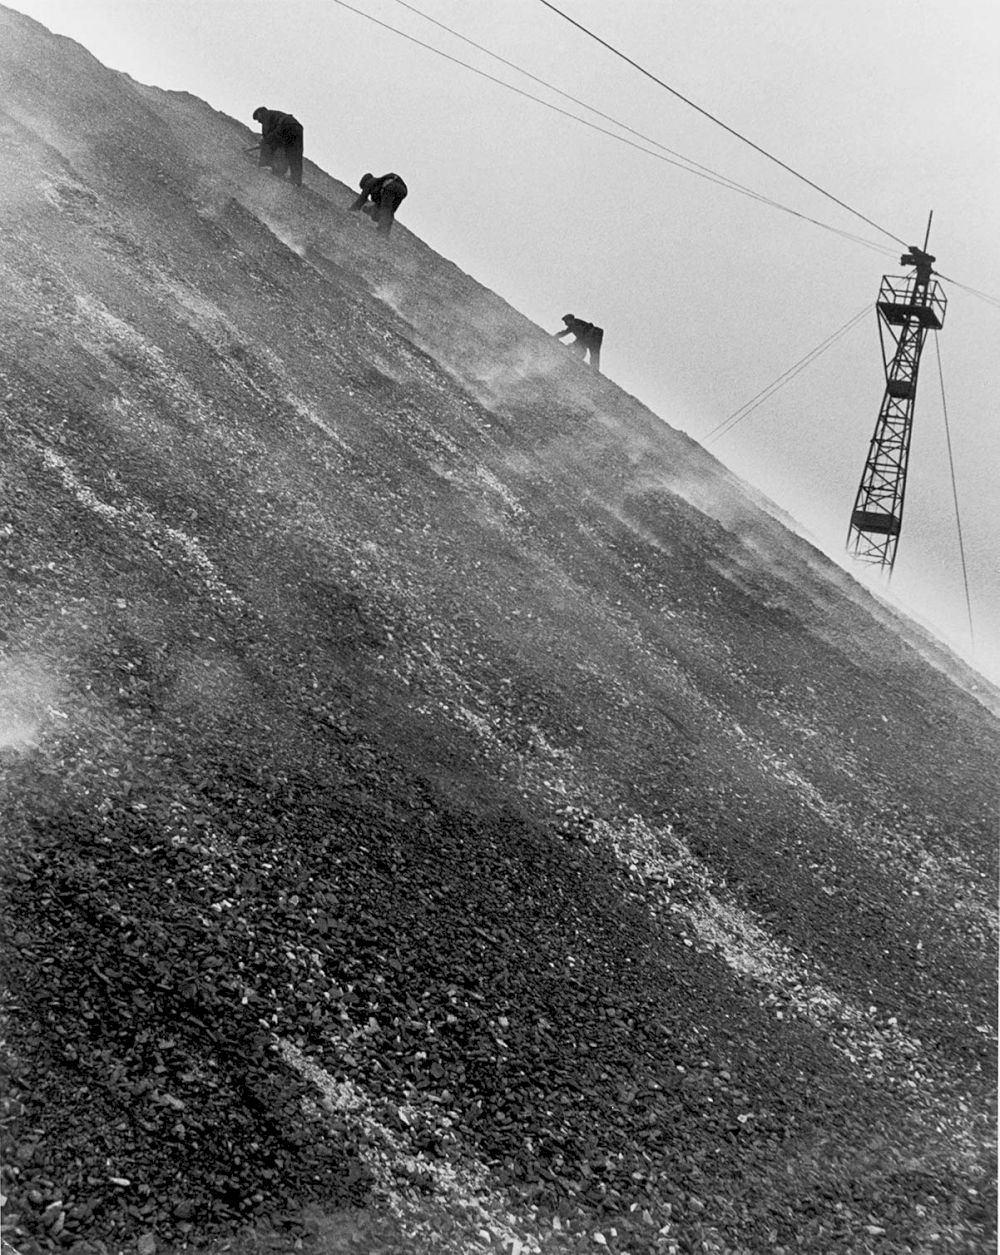 East Durham coal-searchers, 1937 - Private collection, Courtesy Bill Brandt Archive and Edwynn Houk Gallery © Bill Brandt / Bill Brandt Archive Ltd.